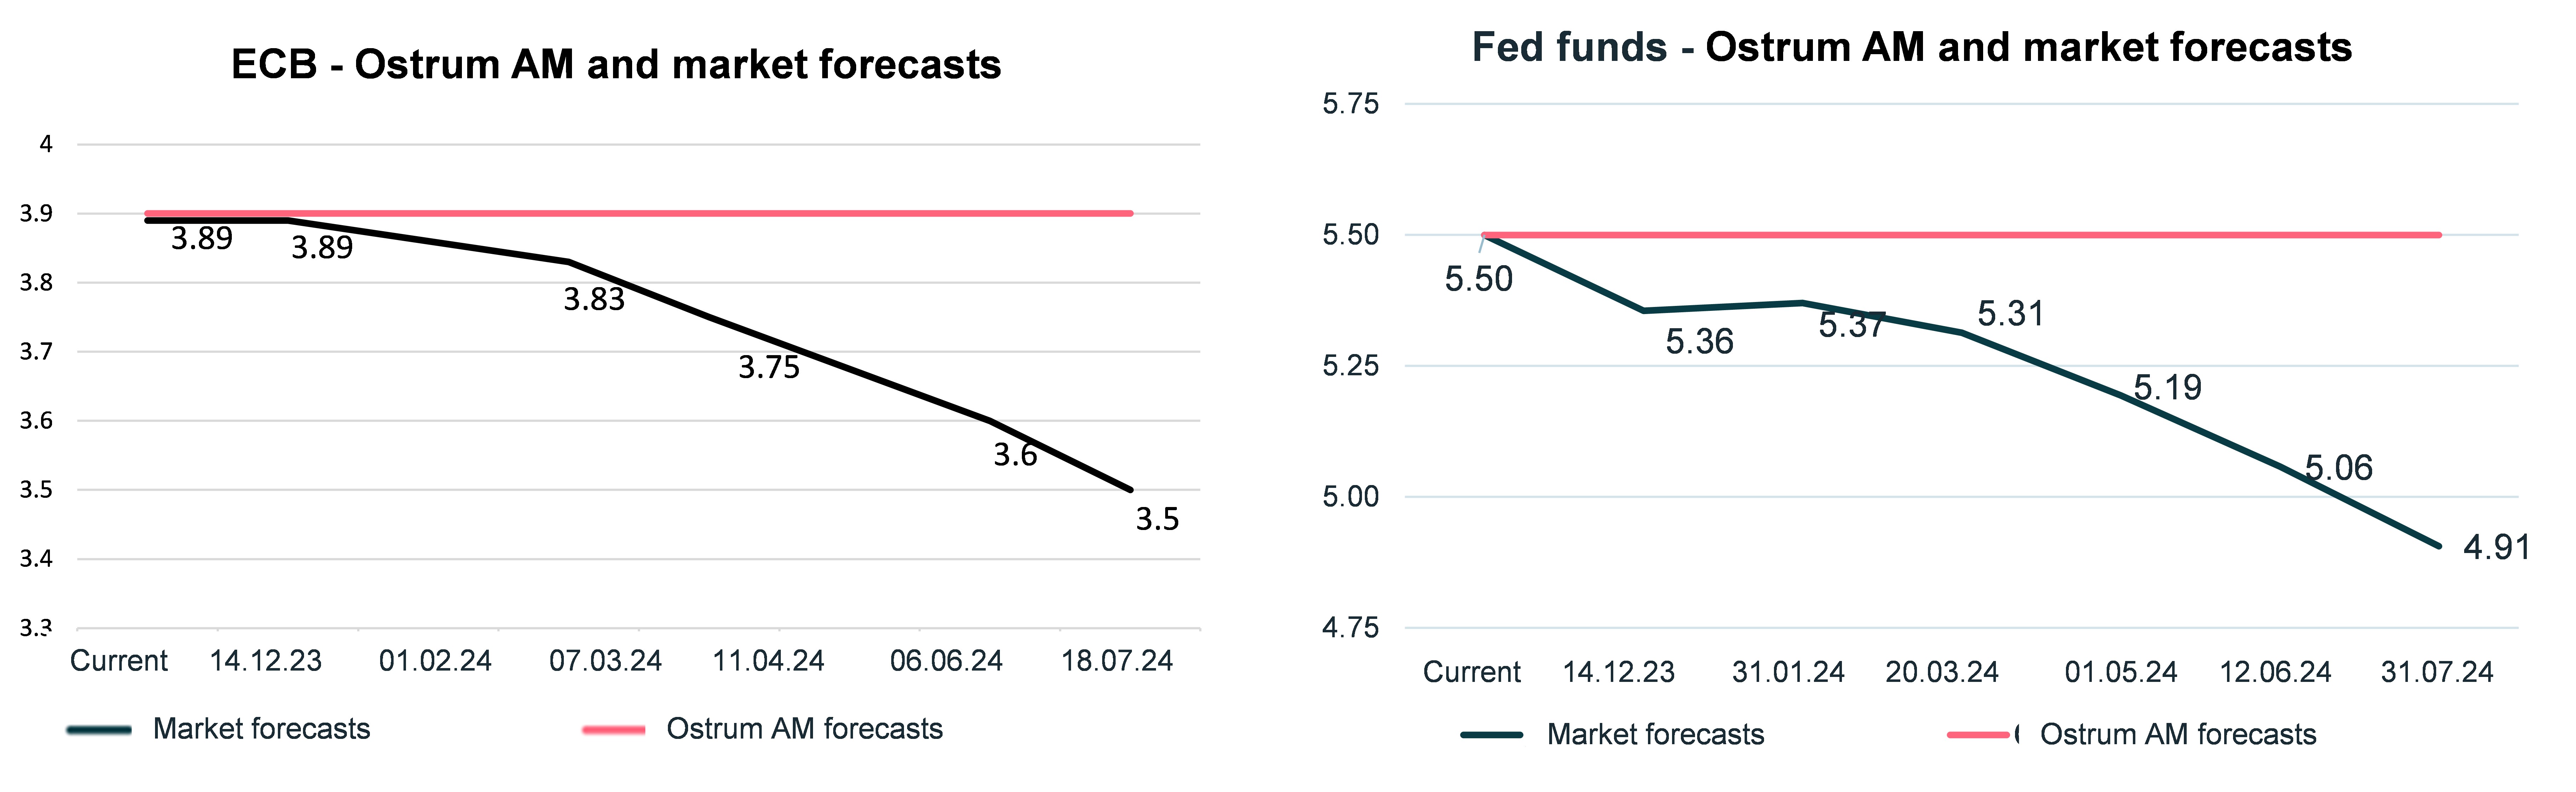 ecb-and-fed-funds-ostrum-am-and-market-forecasts